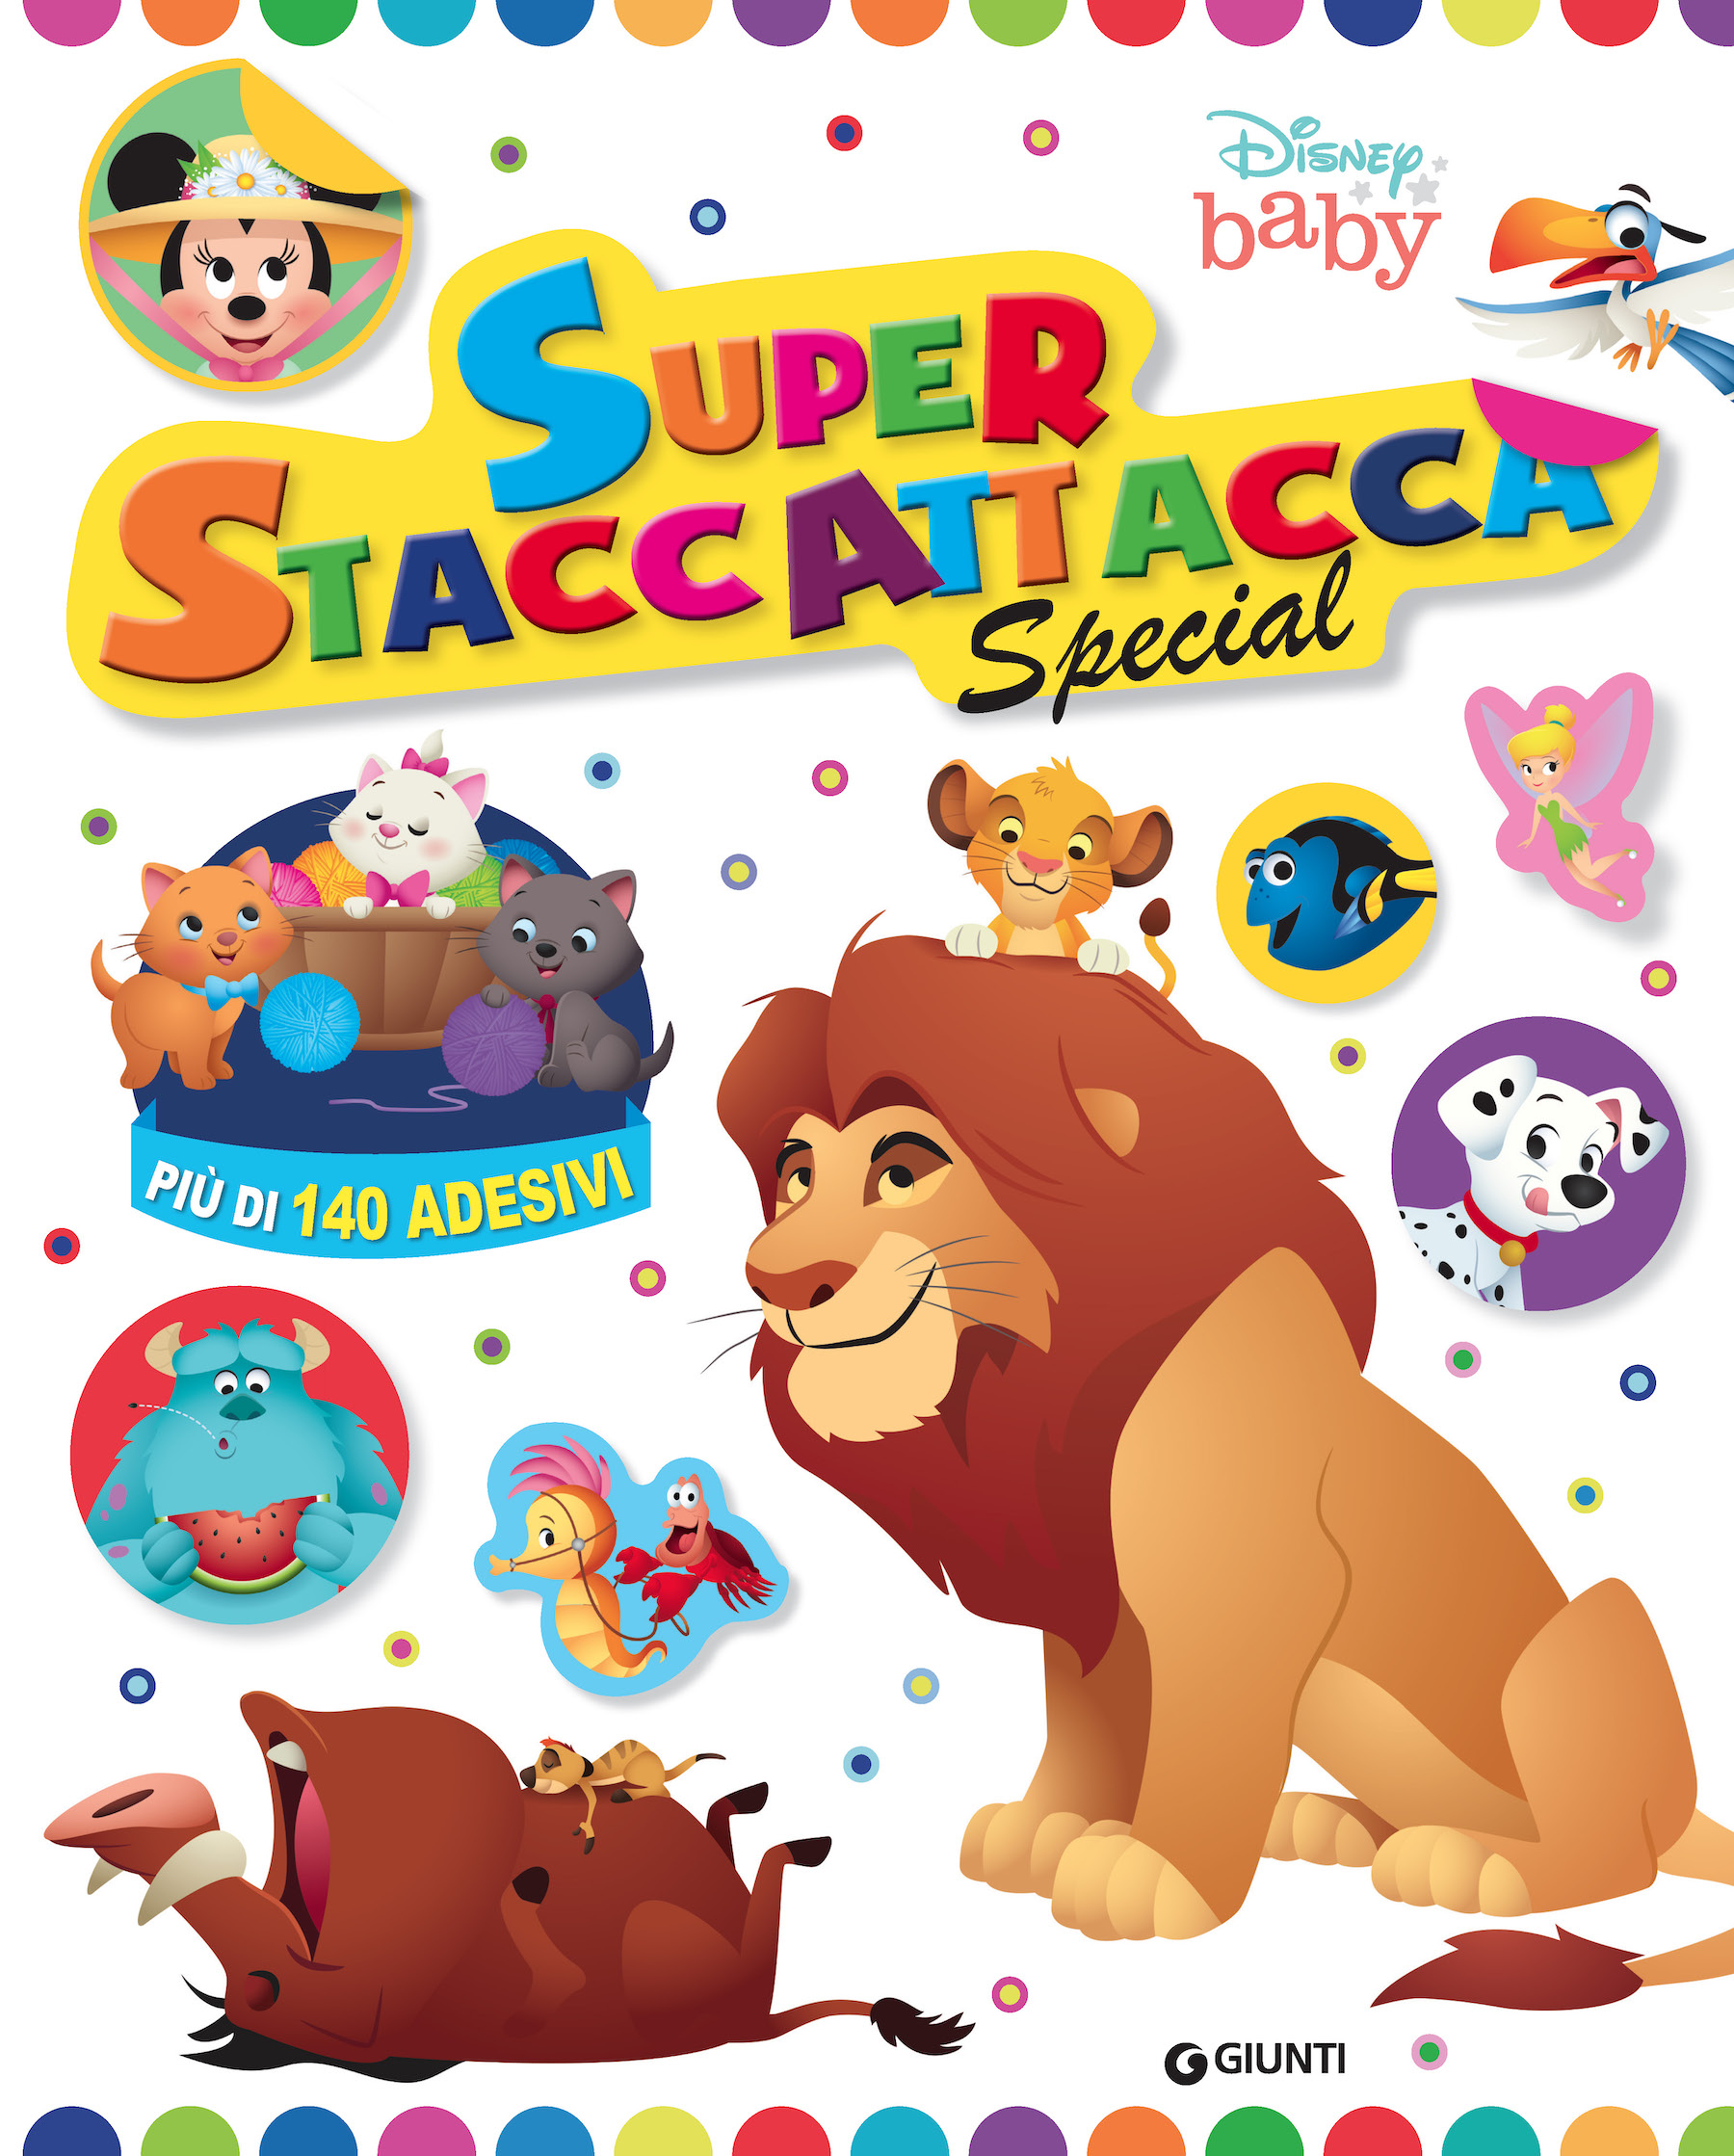 Disney Baby Super Staccattacca Special